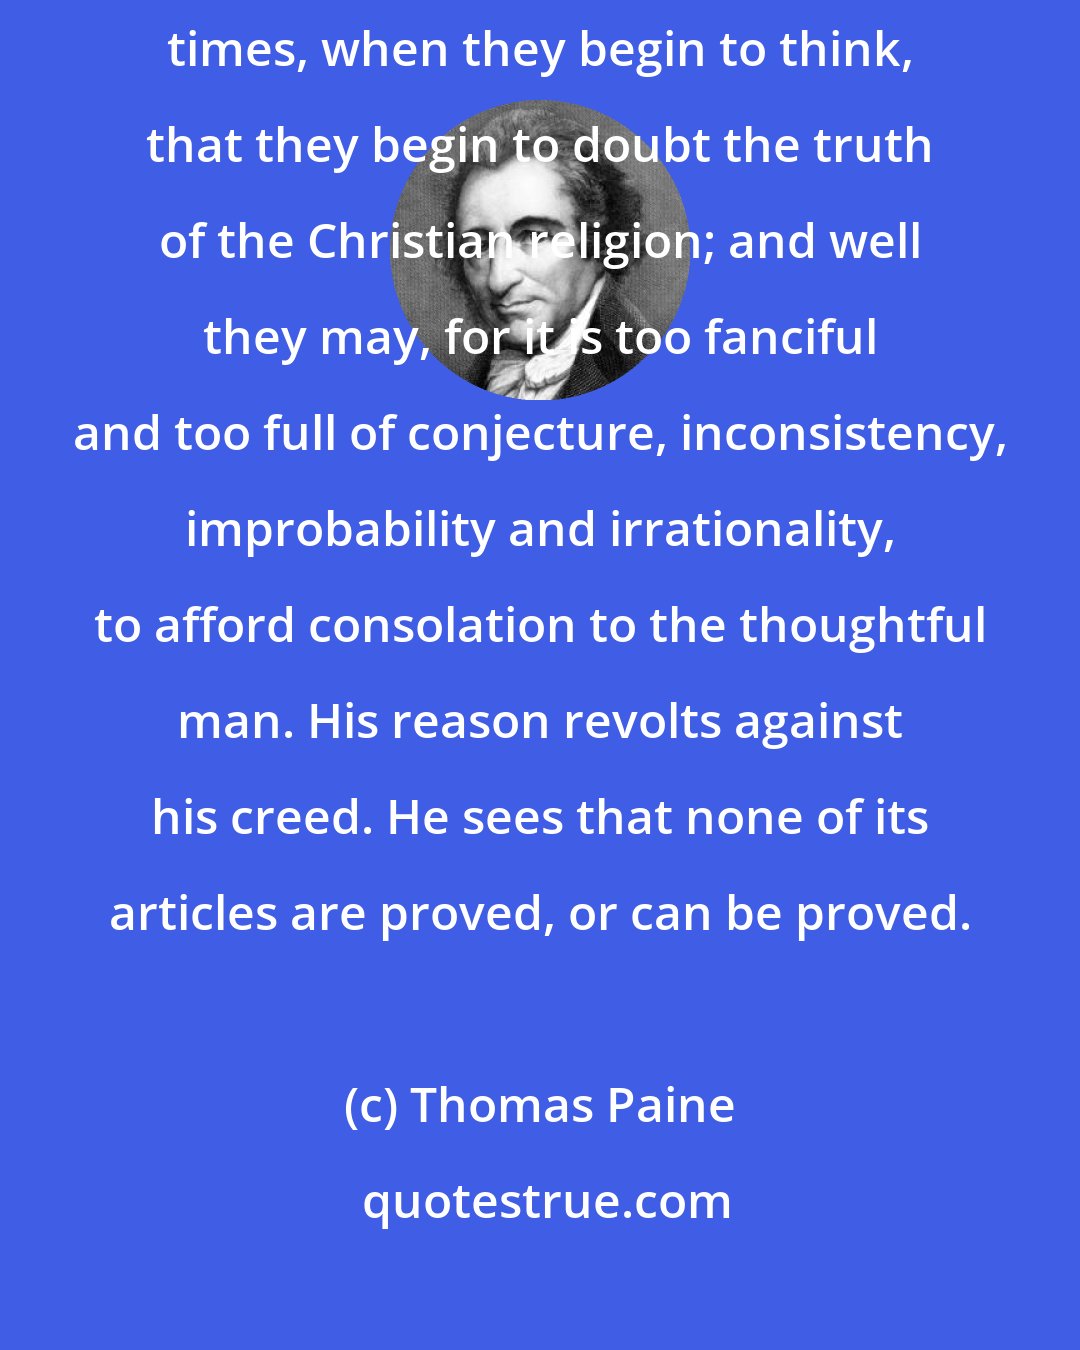 Thomas Paine: But there are times when men have serious thoughts, and it is at such times, when they begin to think, that they begin to doubt the truth of the Christian religion; and well they may, for it is too fanciful and too full of conjecture, inconsistency, improbability and irrationality, to afford consolation to the thoughtful man. His reason revolts against his creed. He sees that none of its articles are proved, or can be proved.